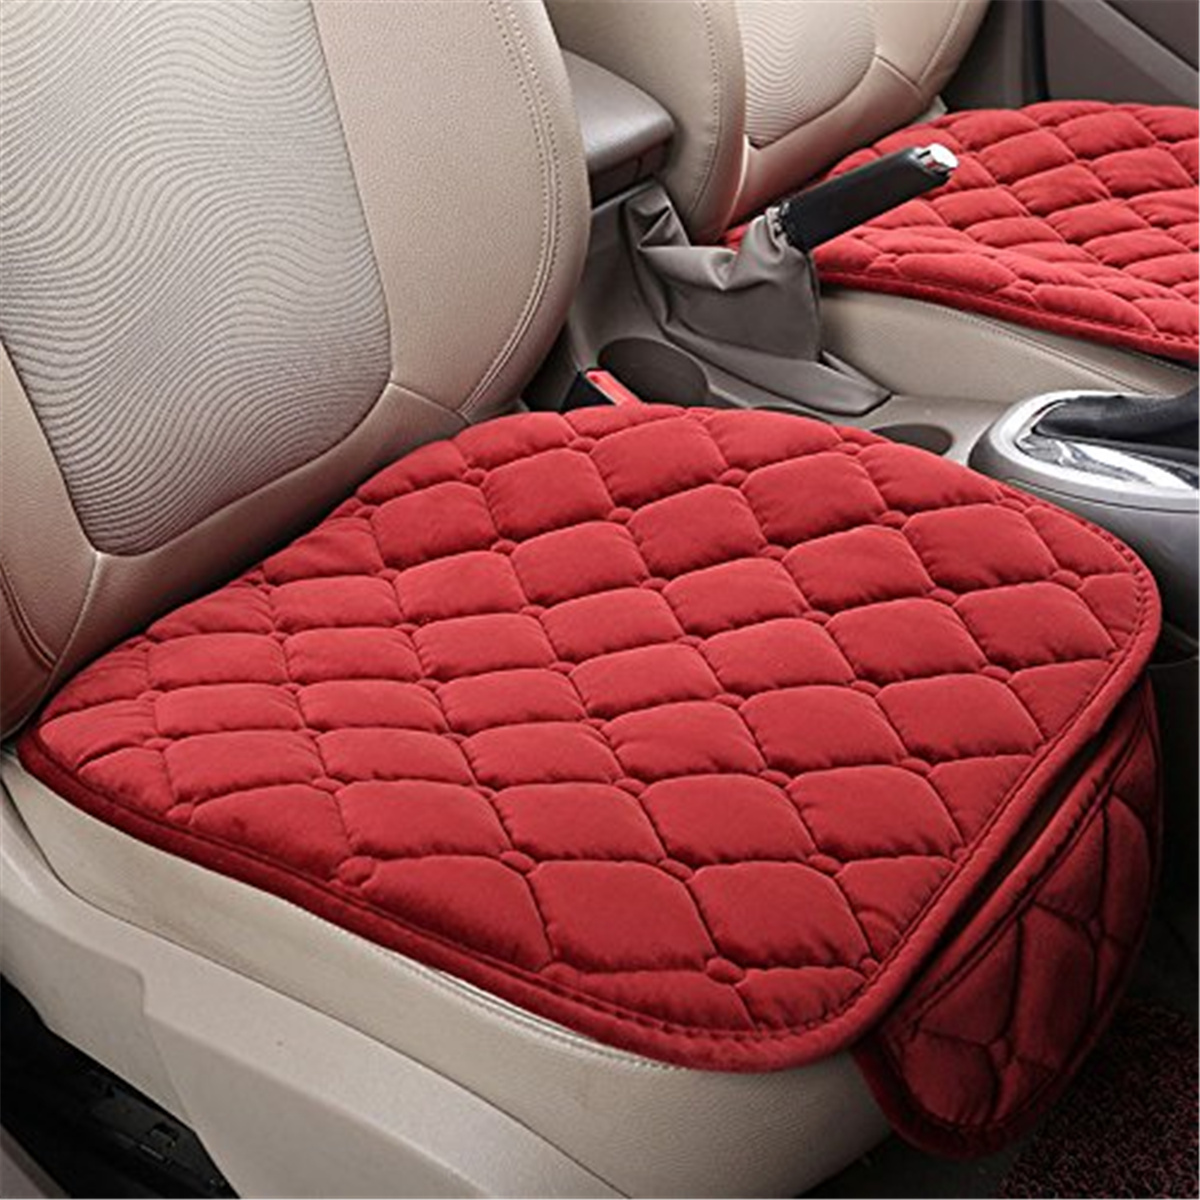 Boiiwant Universal Car Seat Cover 3D Cotton Breathable Soft Cushion  Protector